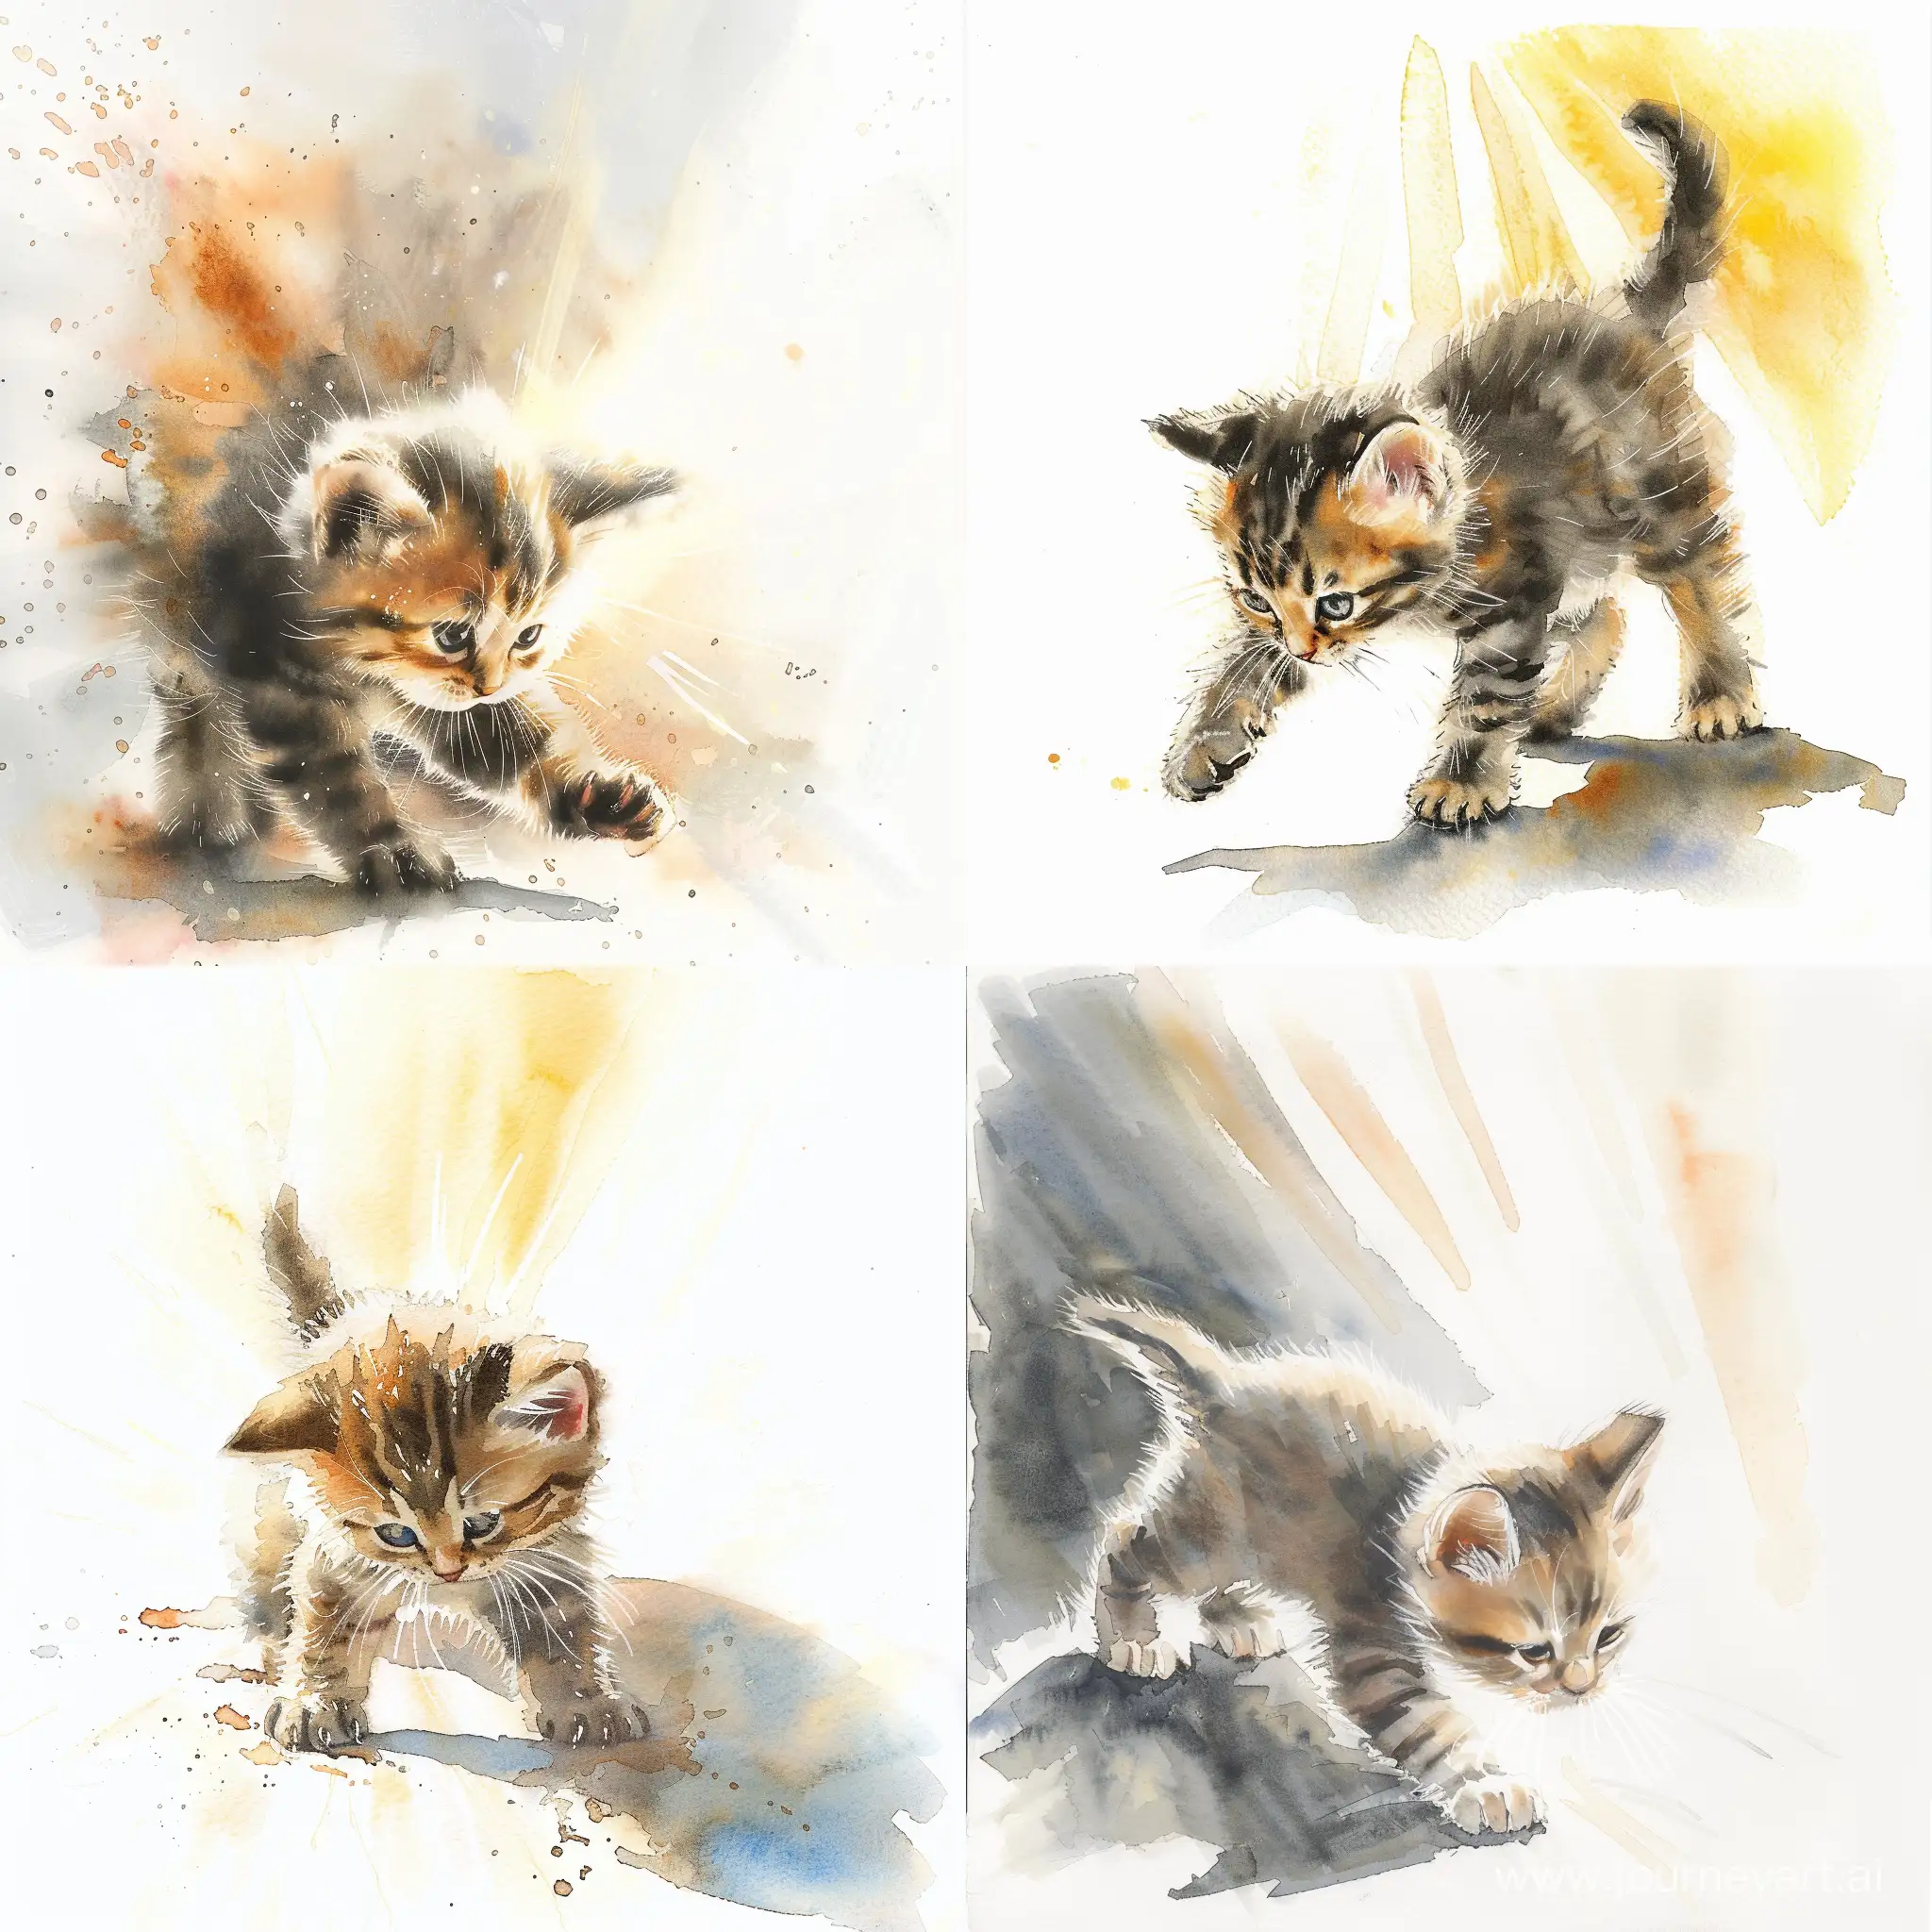 Adorable-Kitten-Delighted-by-Sunlight-Watercolor-Painting-on-White-Background